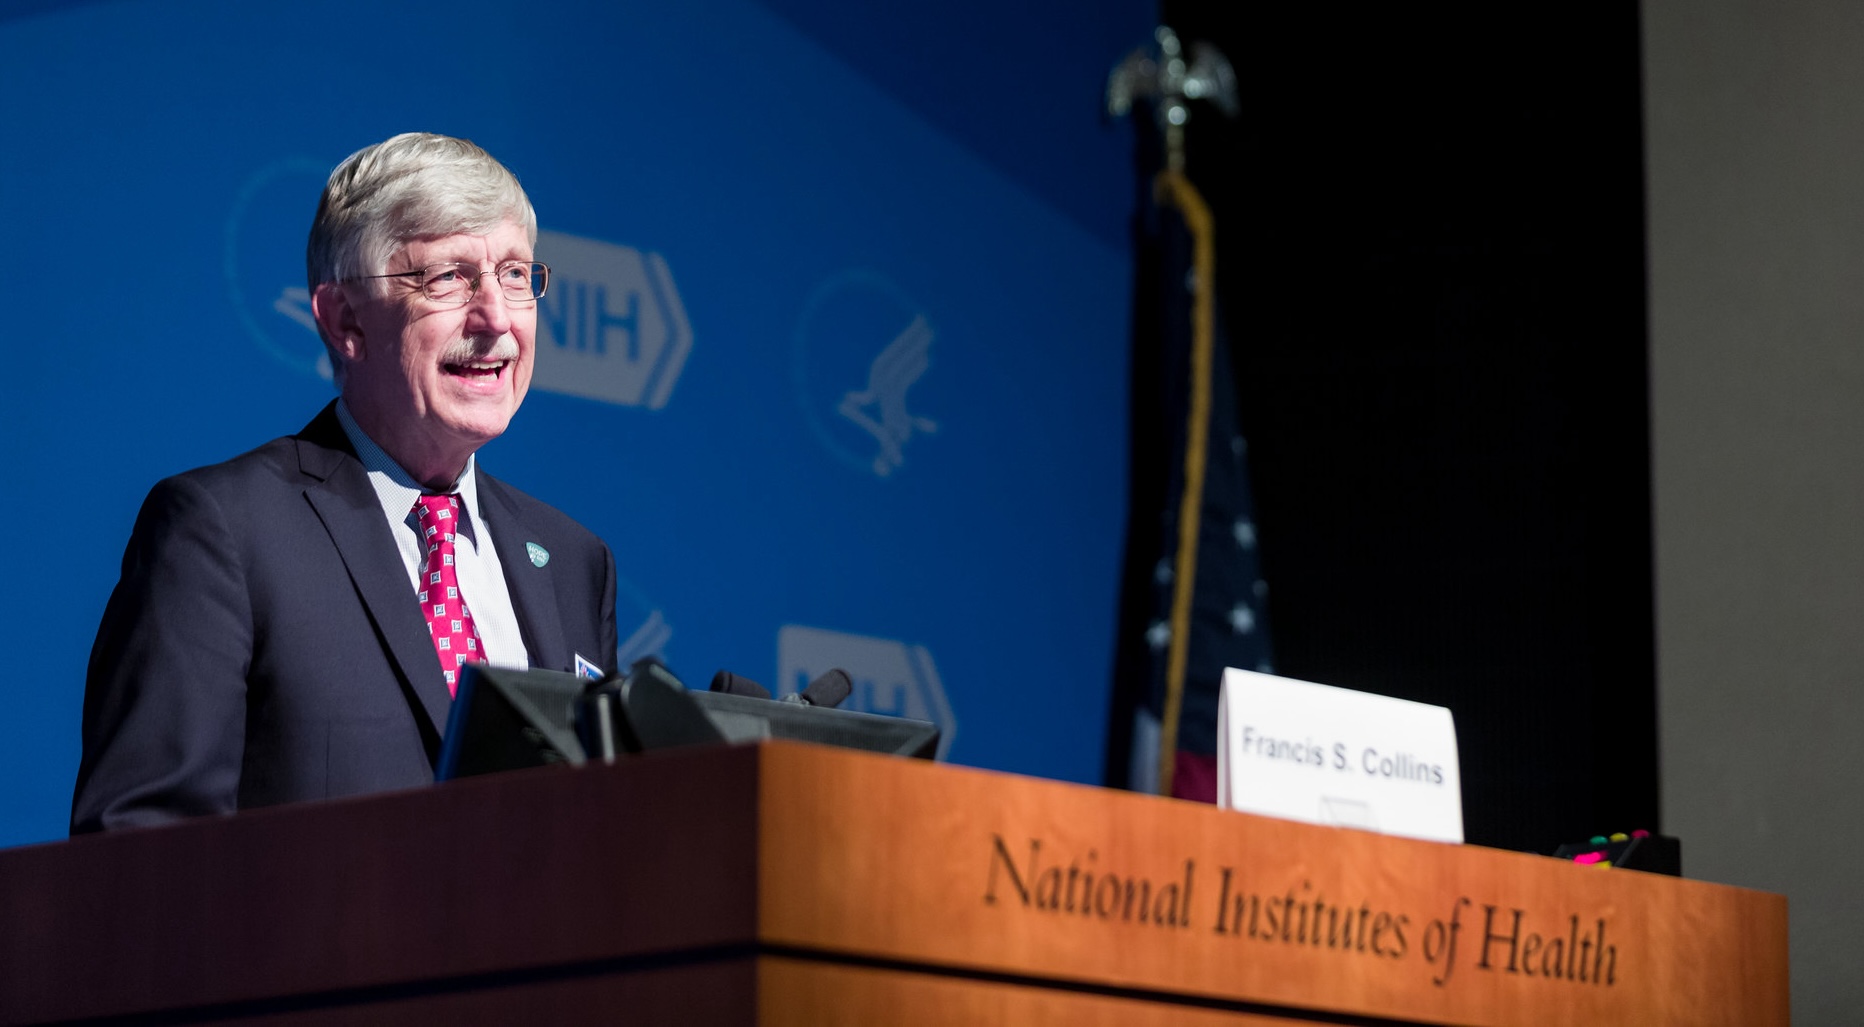 A Federal ‘Recovery Provision’ Can Prevent Another Fauci, Collins, or Walensky Scenario